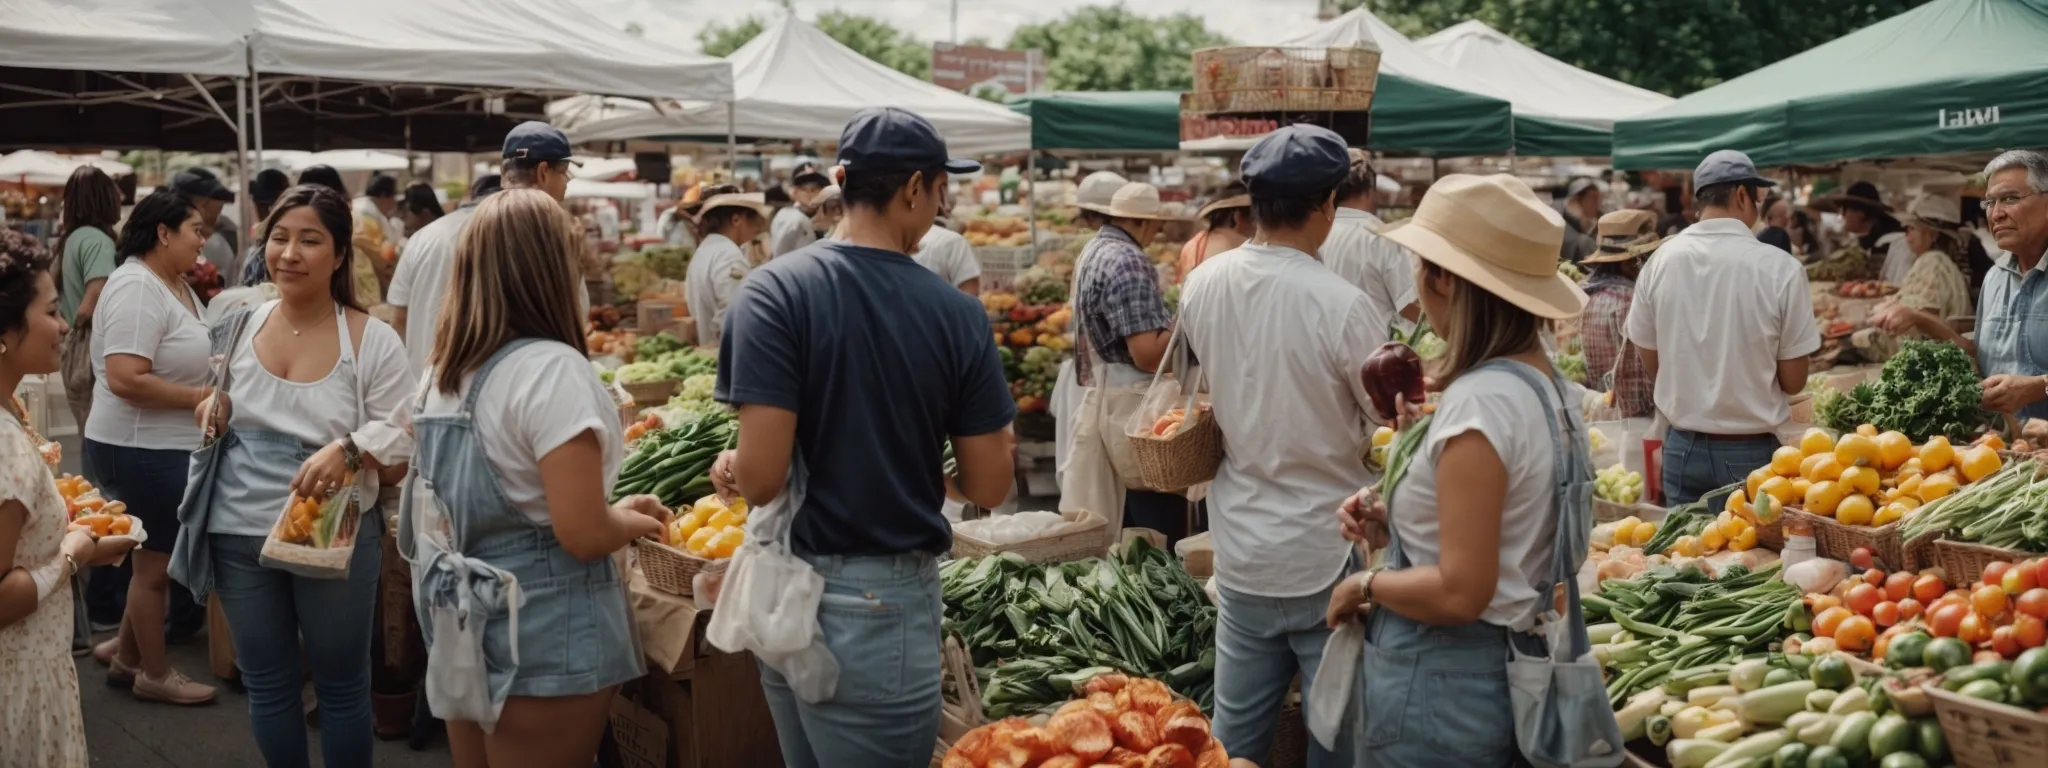 a bustling new jersey farmers market with vendors and shoppers engaged in lively interactions amid stalls brimming with local produce.